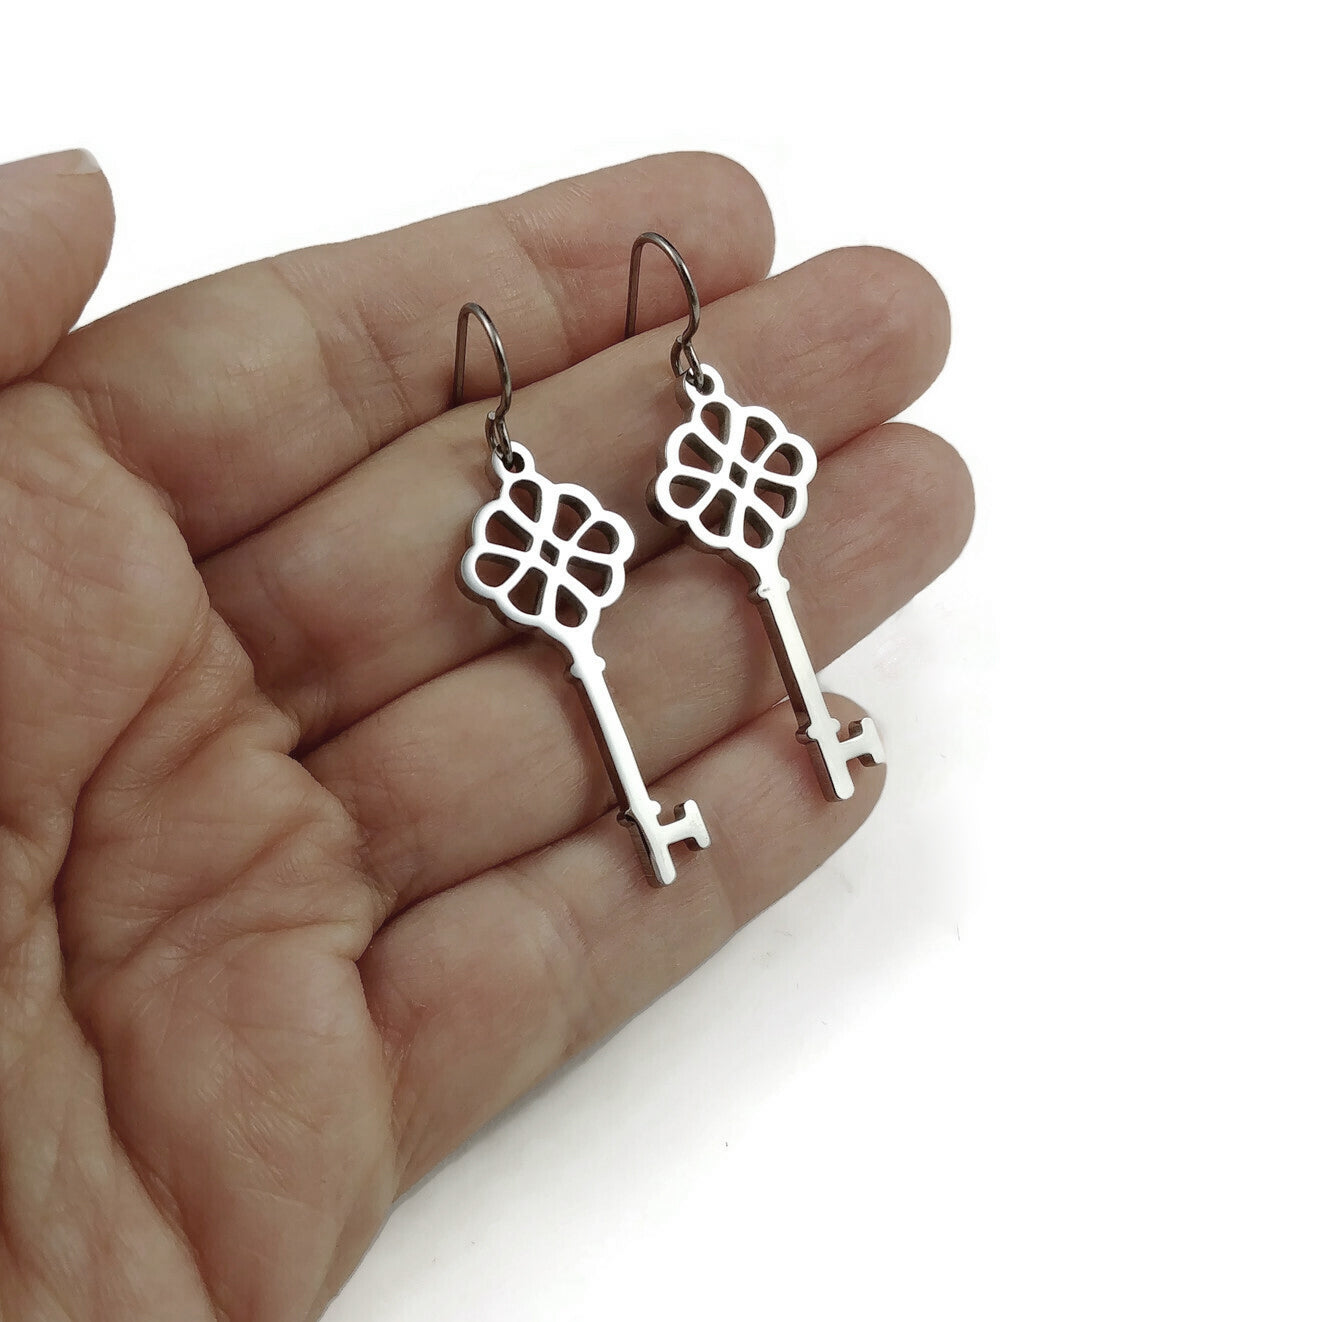 Silver victorian key dangle earrings - Hypoallergenic pure titanium and stainless steel